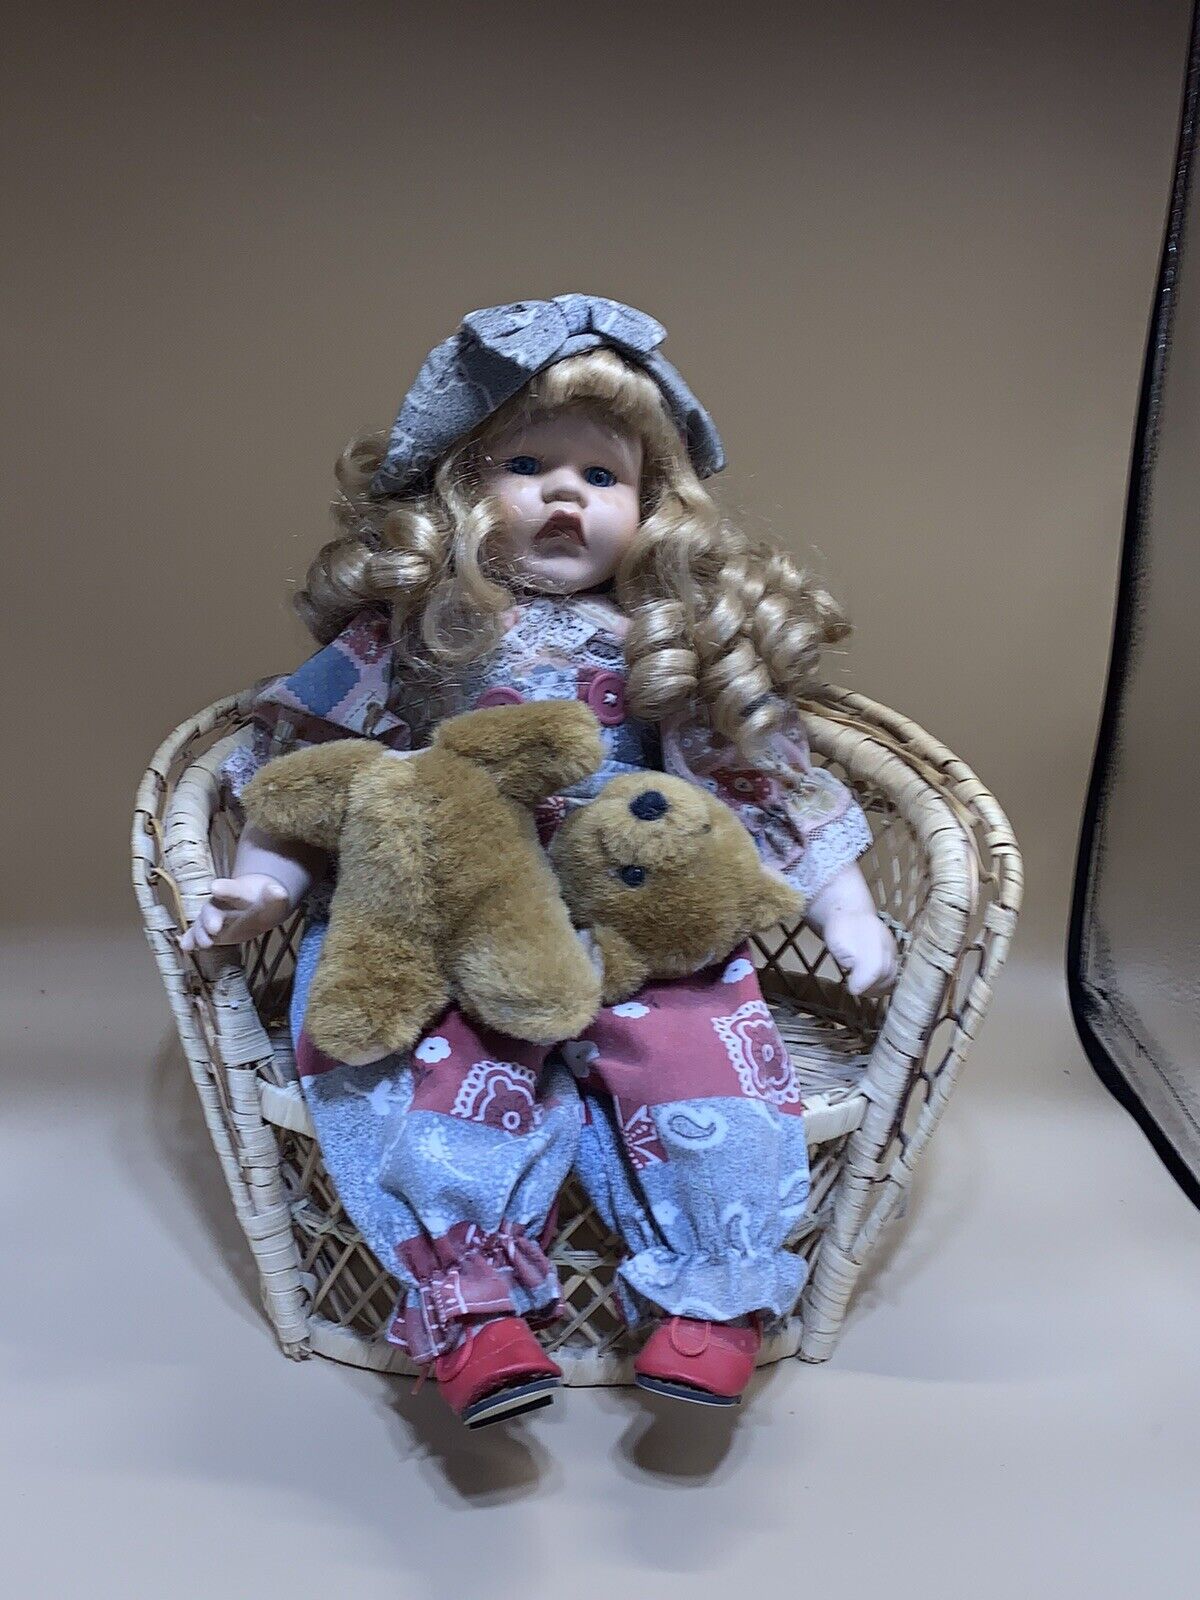 VERY PRETTY DOLL WHOSE BEAR HAS LOST ITS HEAD AND IS CRYING SITTING ON A CHAIR